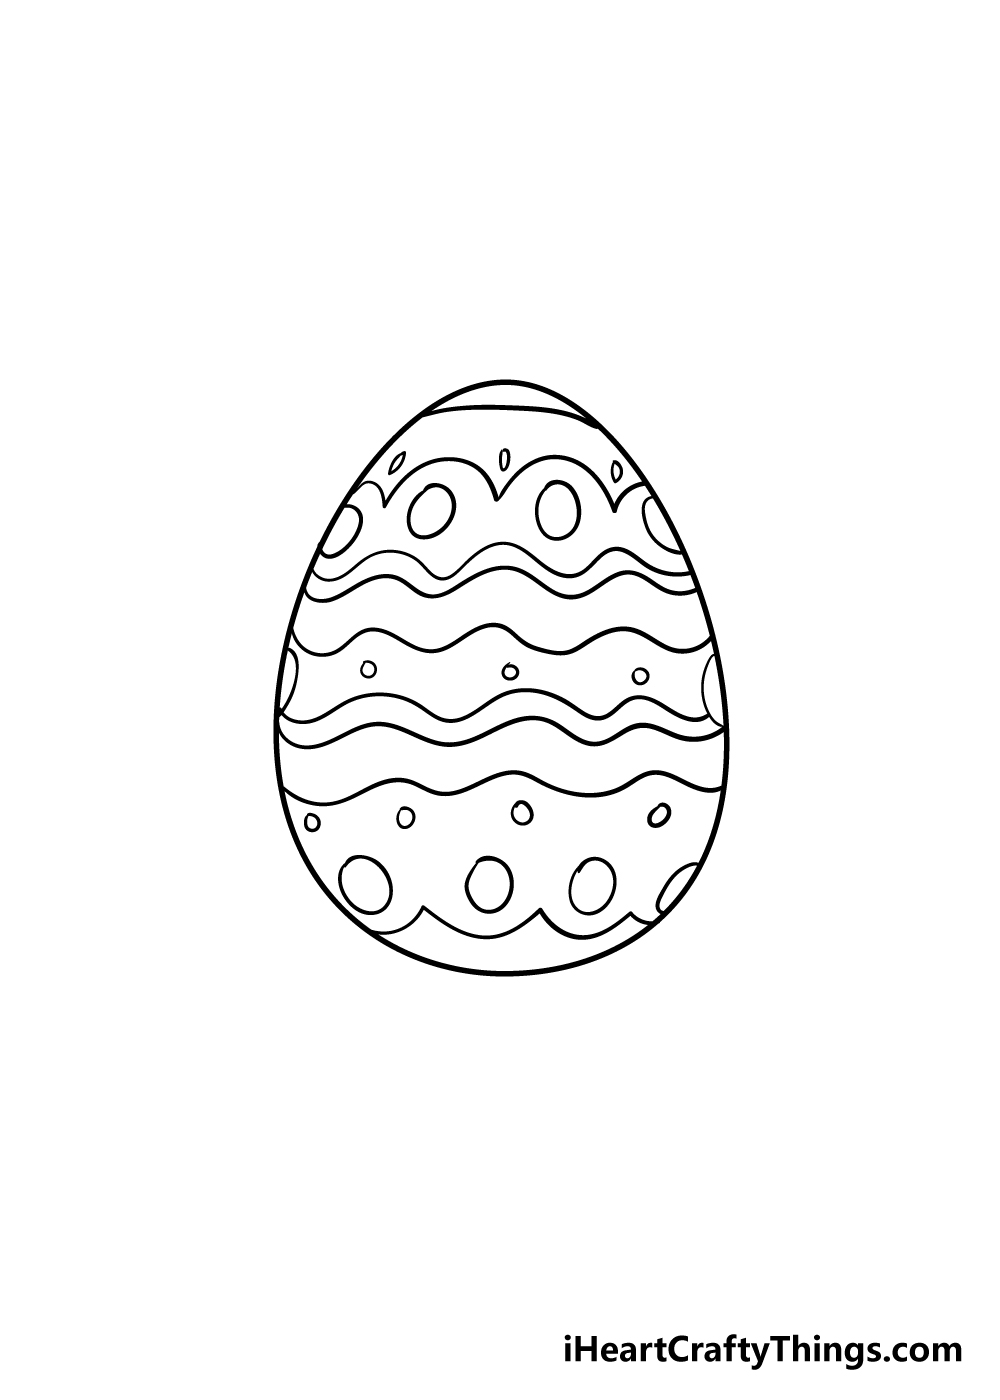 Easter Egg Drawing - How To Draw An Easter Egg Step By Step